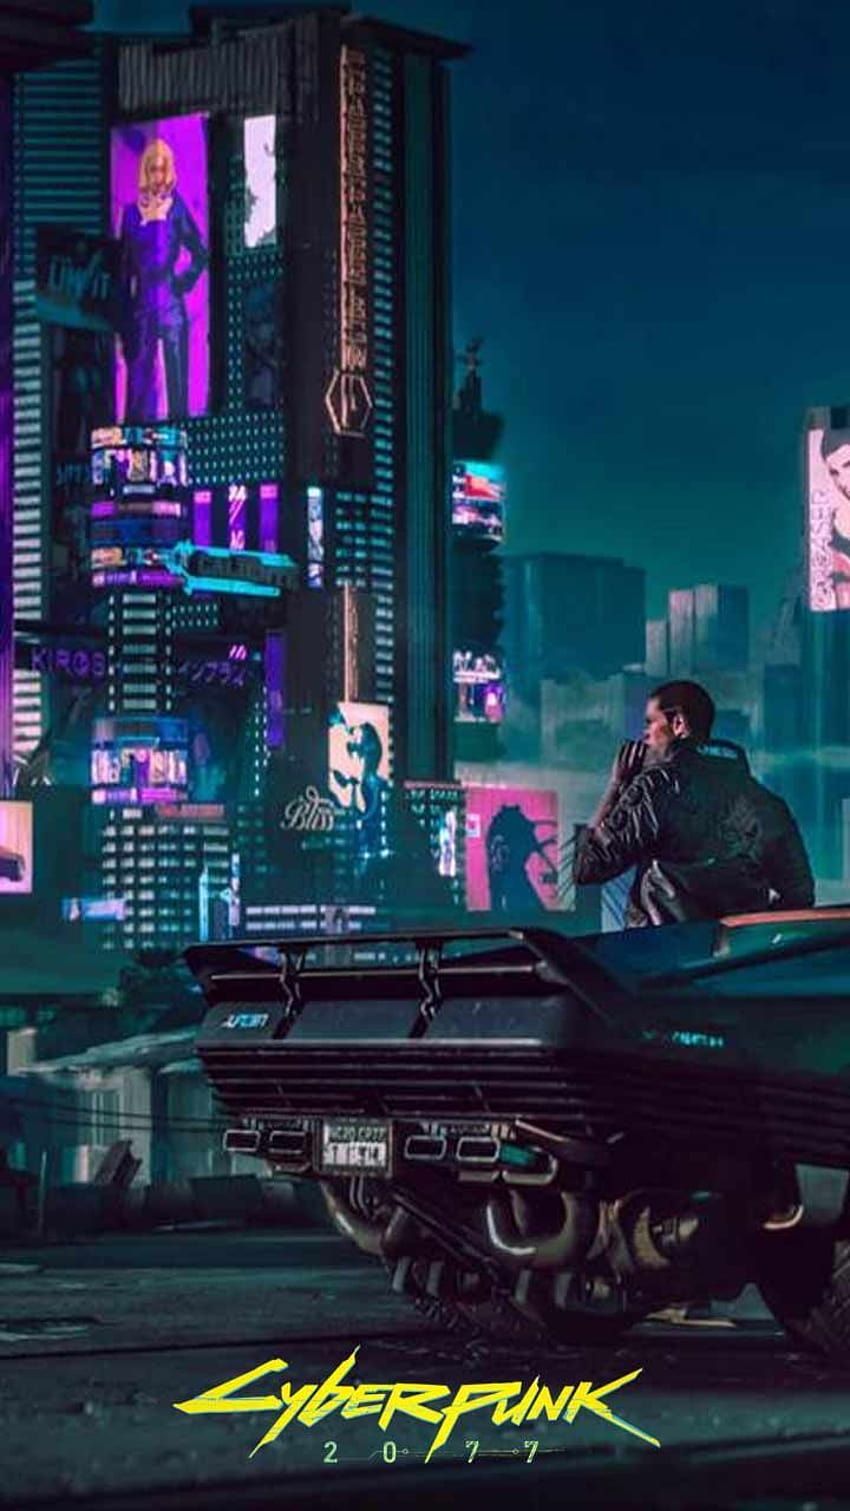 Cyberpunk 2077 phone background Night city game logo art Poster on iPhone android in cyberpunk 2077 iphone HD phone wallpaper